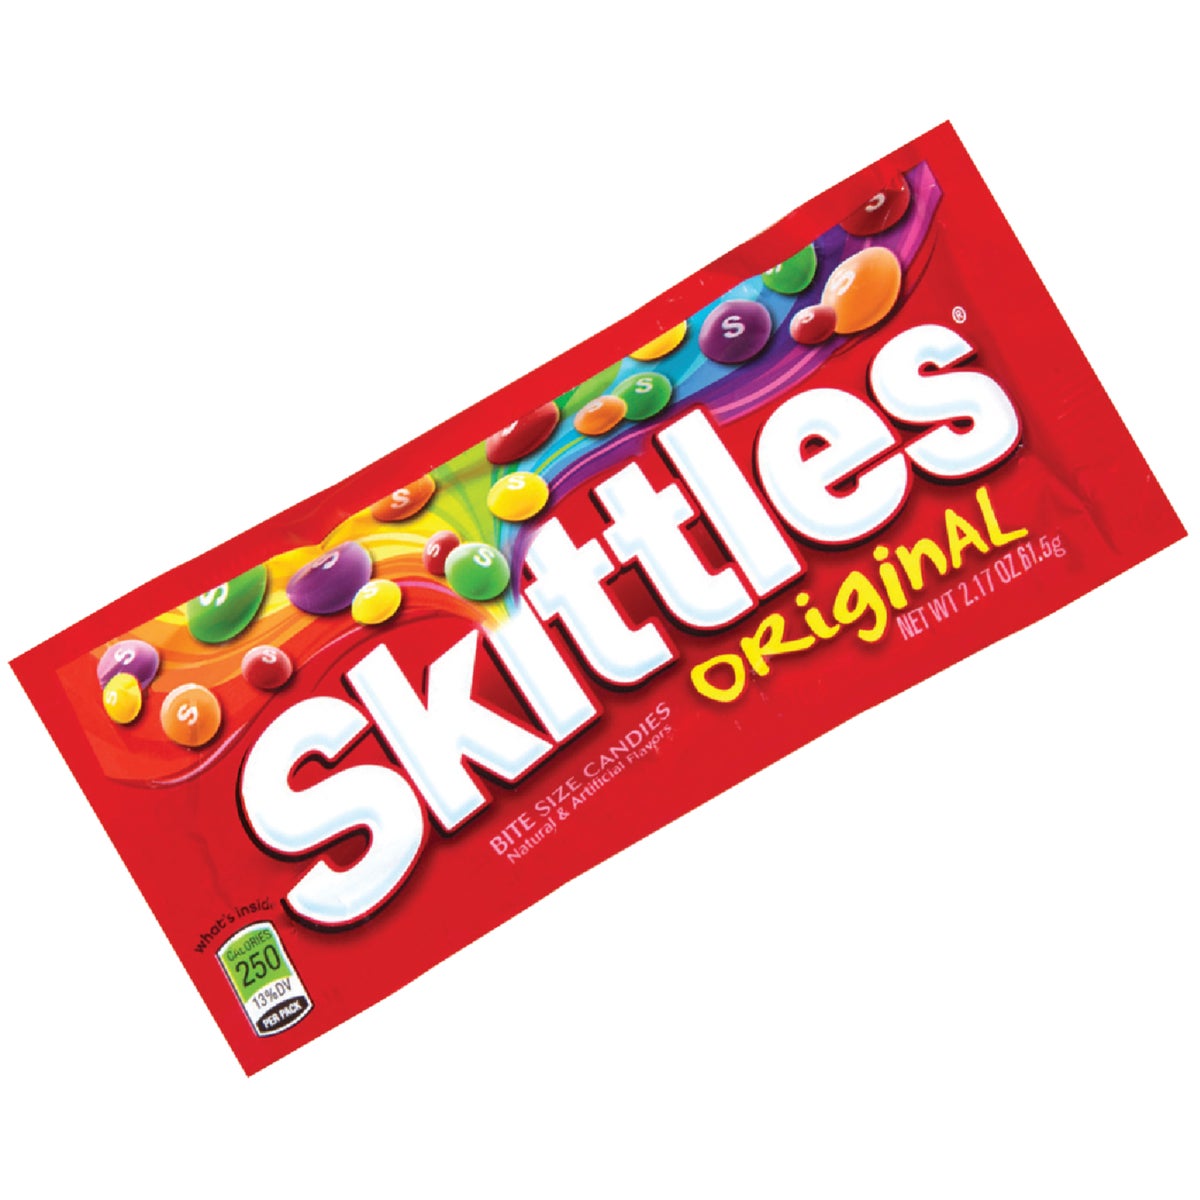 Skittles Assorted Fruit Flavors 2.17 Oz. Candy